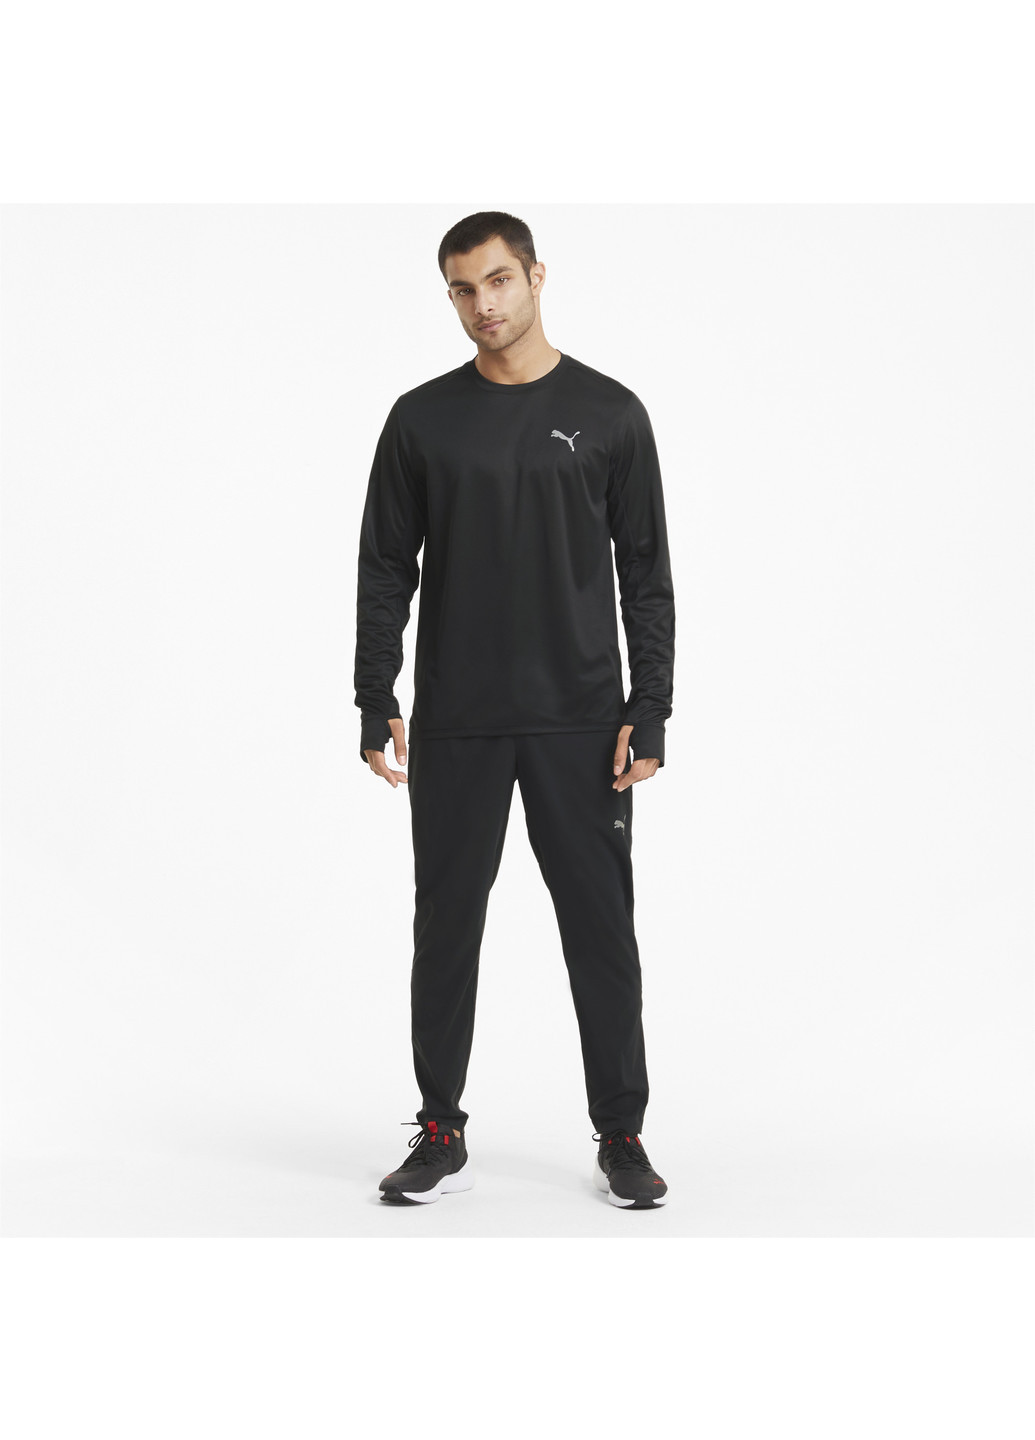 Штани Favourite Tapered Men's Running Pants Puma (216134302)